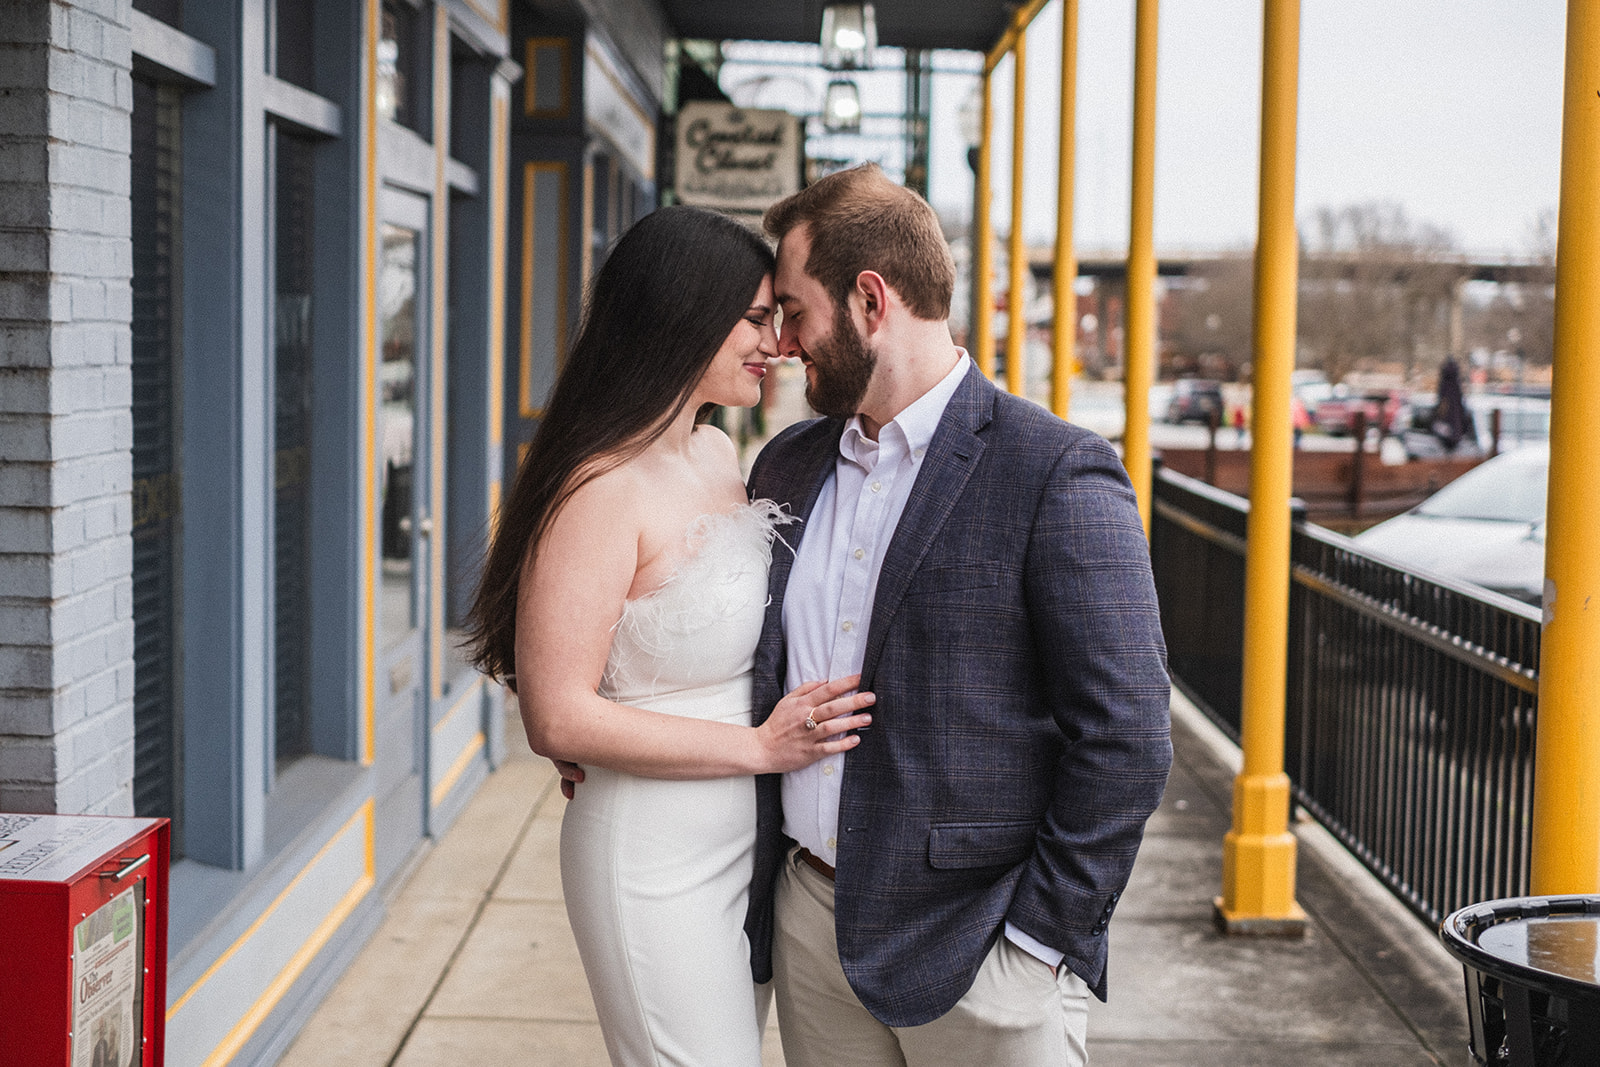 A couple celebrates their engagement to be married in historic downtown opelika alabama